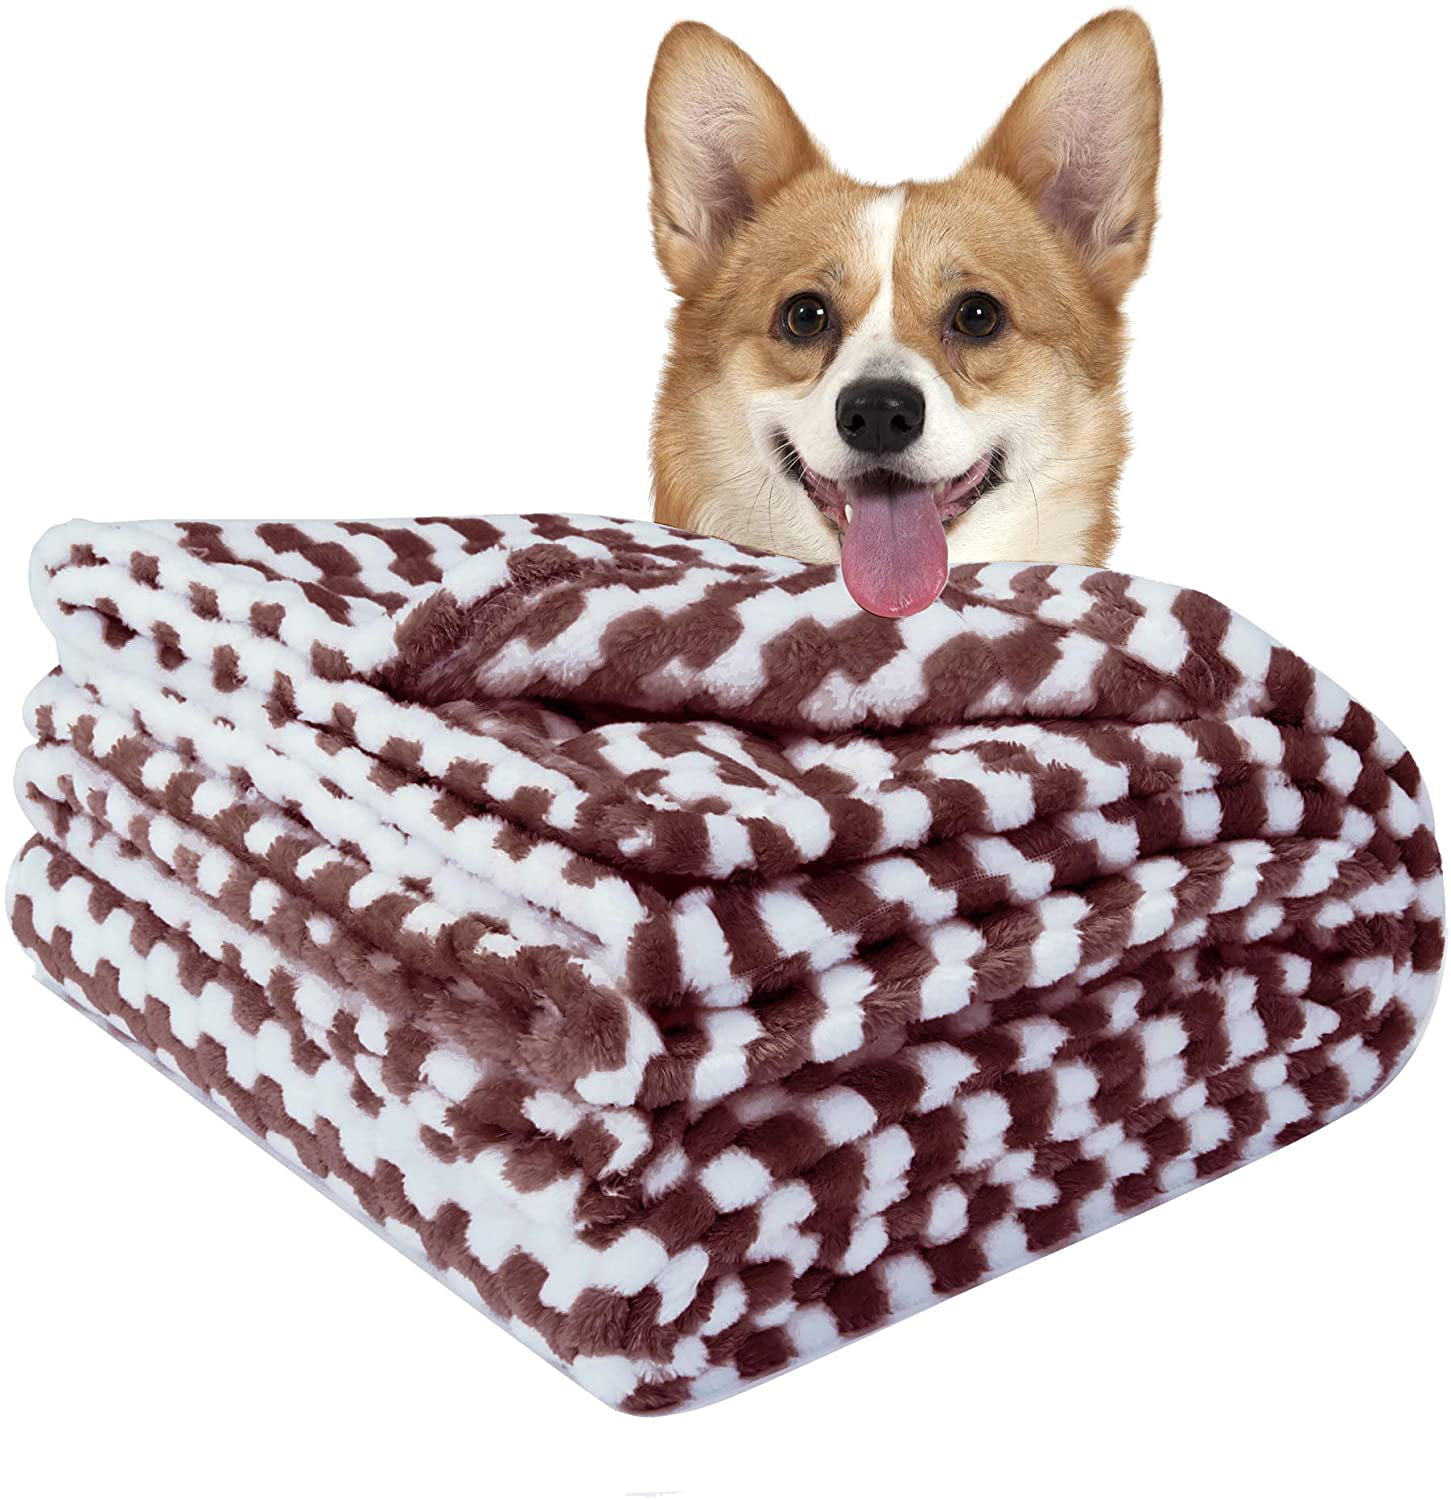 Msicyness Dog Blanket,Soft Fuzzy Blankets for Puppy Small,Medium,Large,X-Large Premium Fluffy Blankets Plush Fleece Throw Dog Bed Reversible Travel Warm Covers Sofa Couch